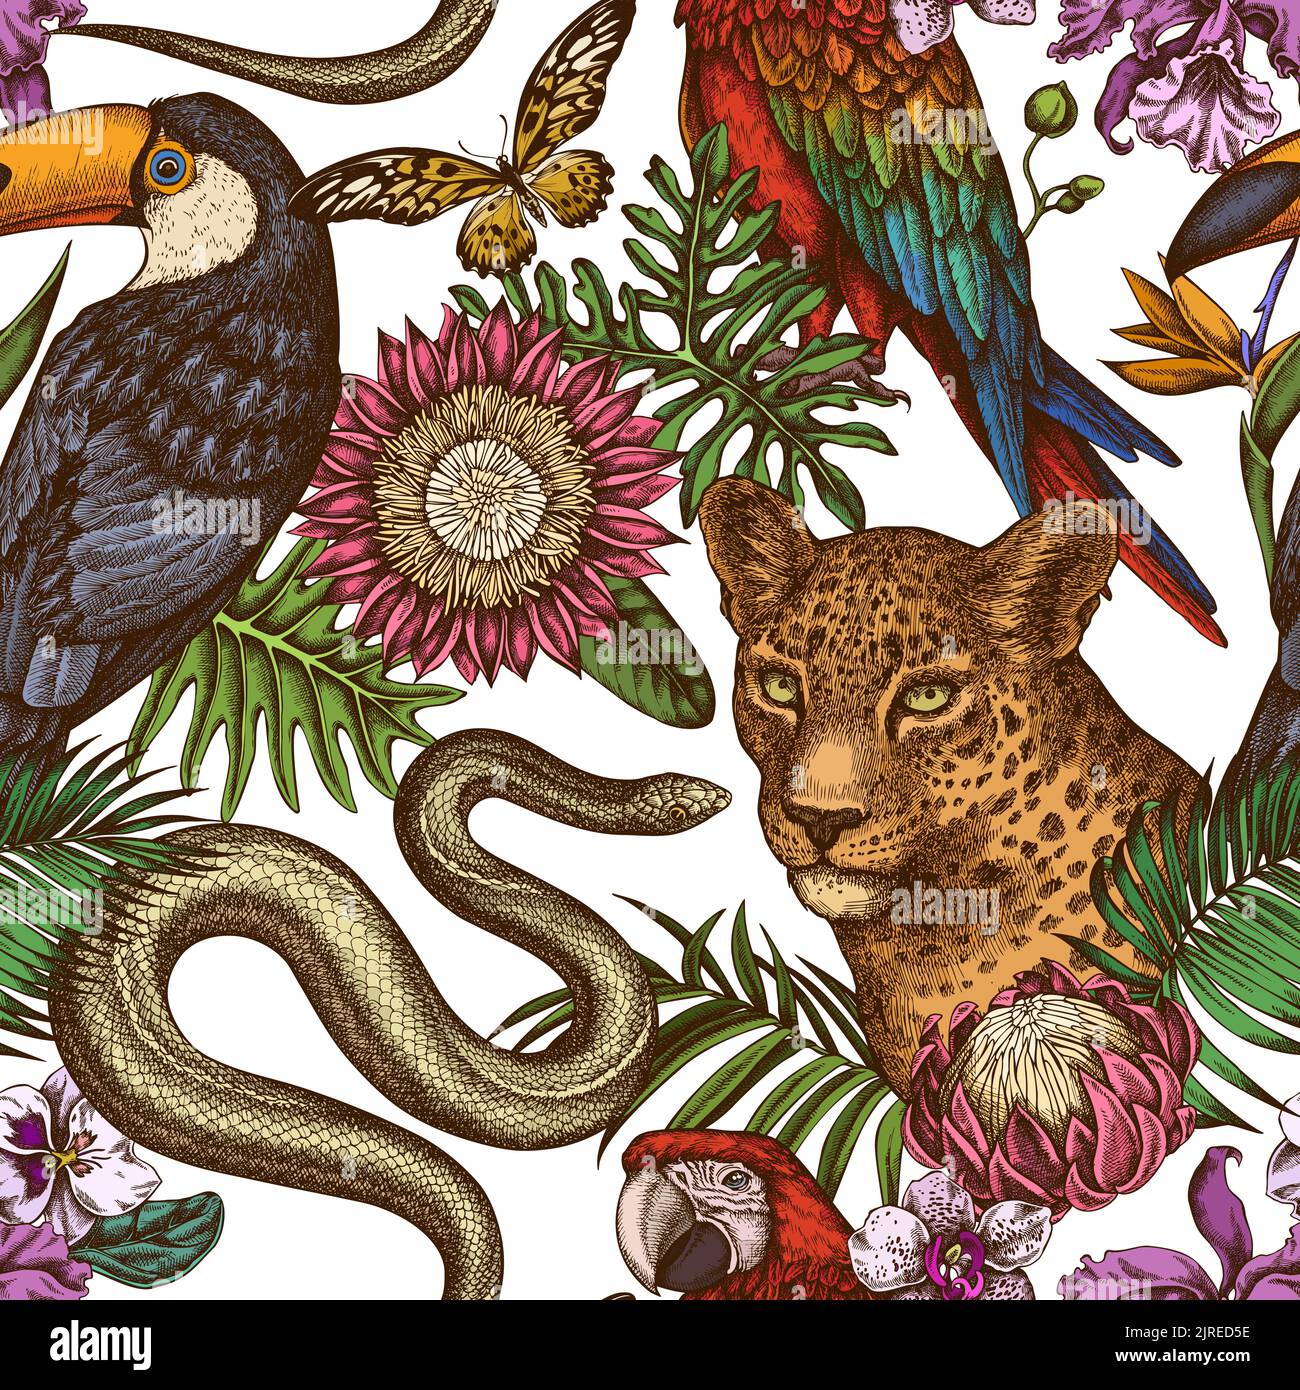 Tropical animals seamless pattern background design. Engraved style. Hand drawn leopard, snake, toucan, scarlet macaw, african giant swallowtail Stock Vector